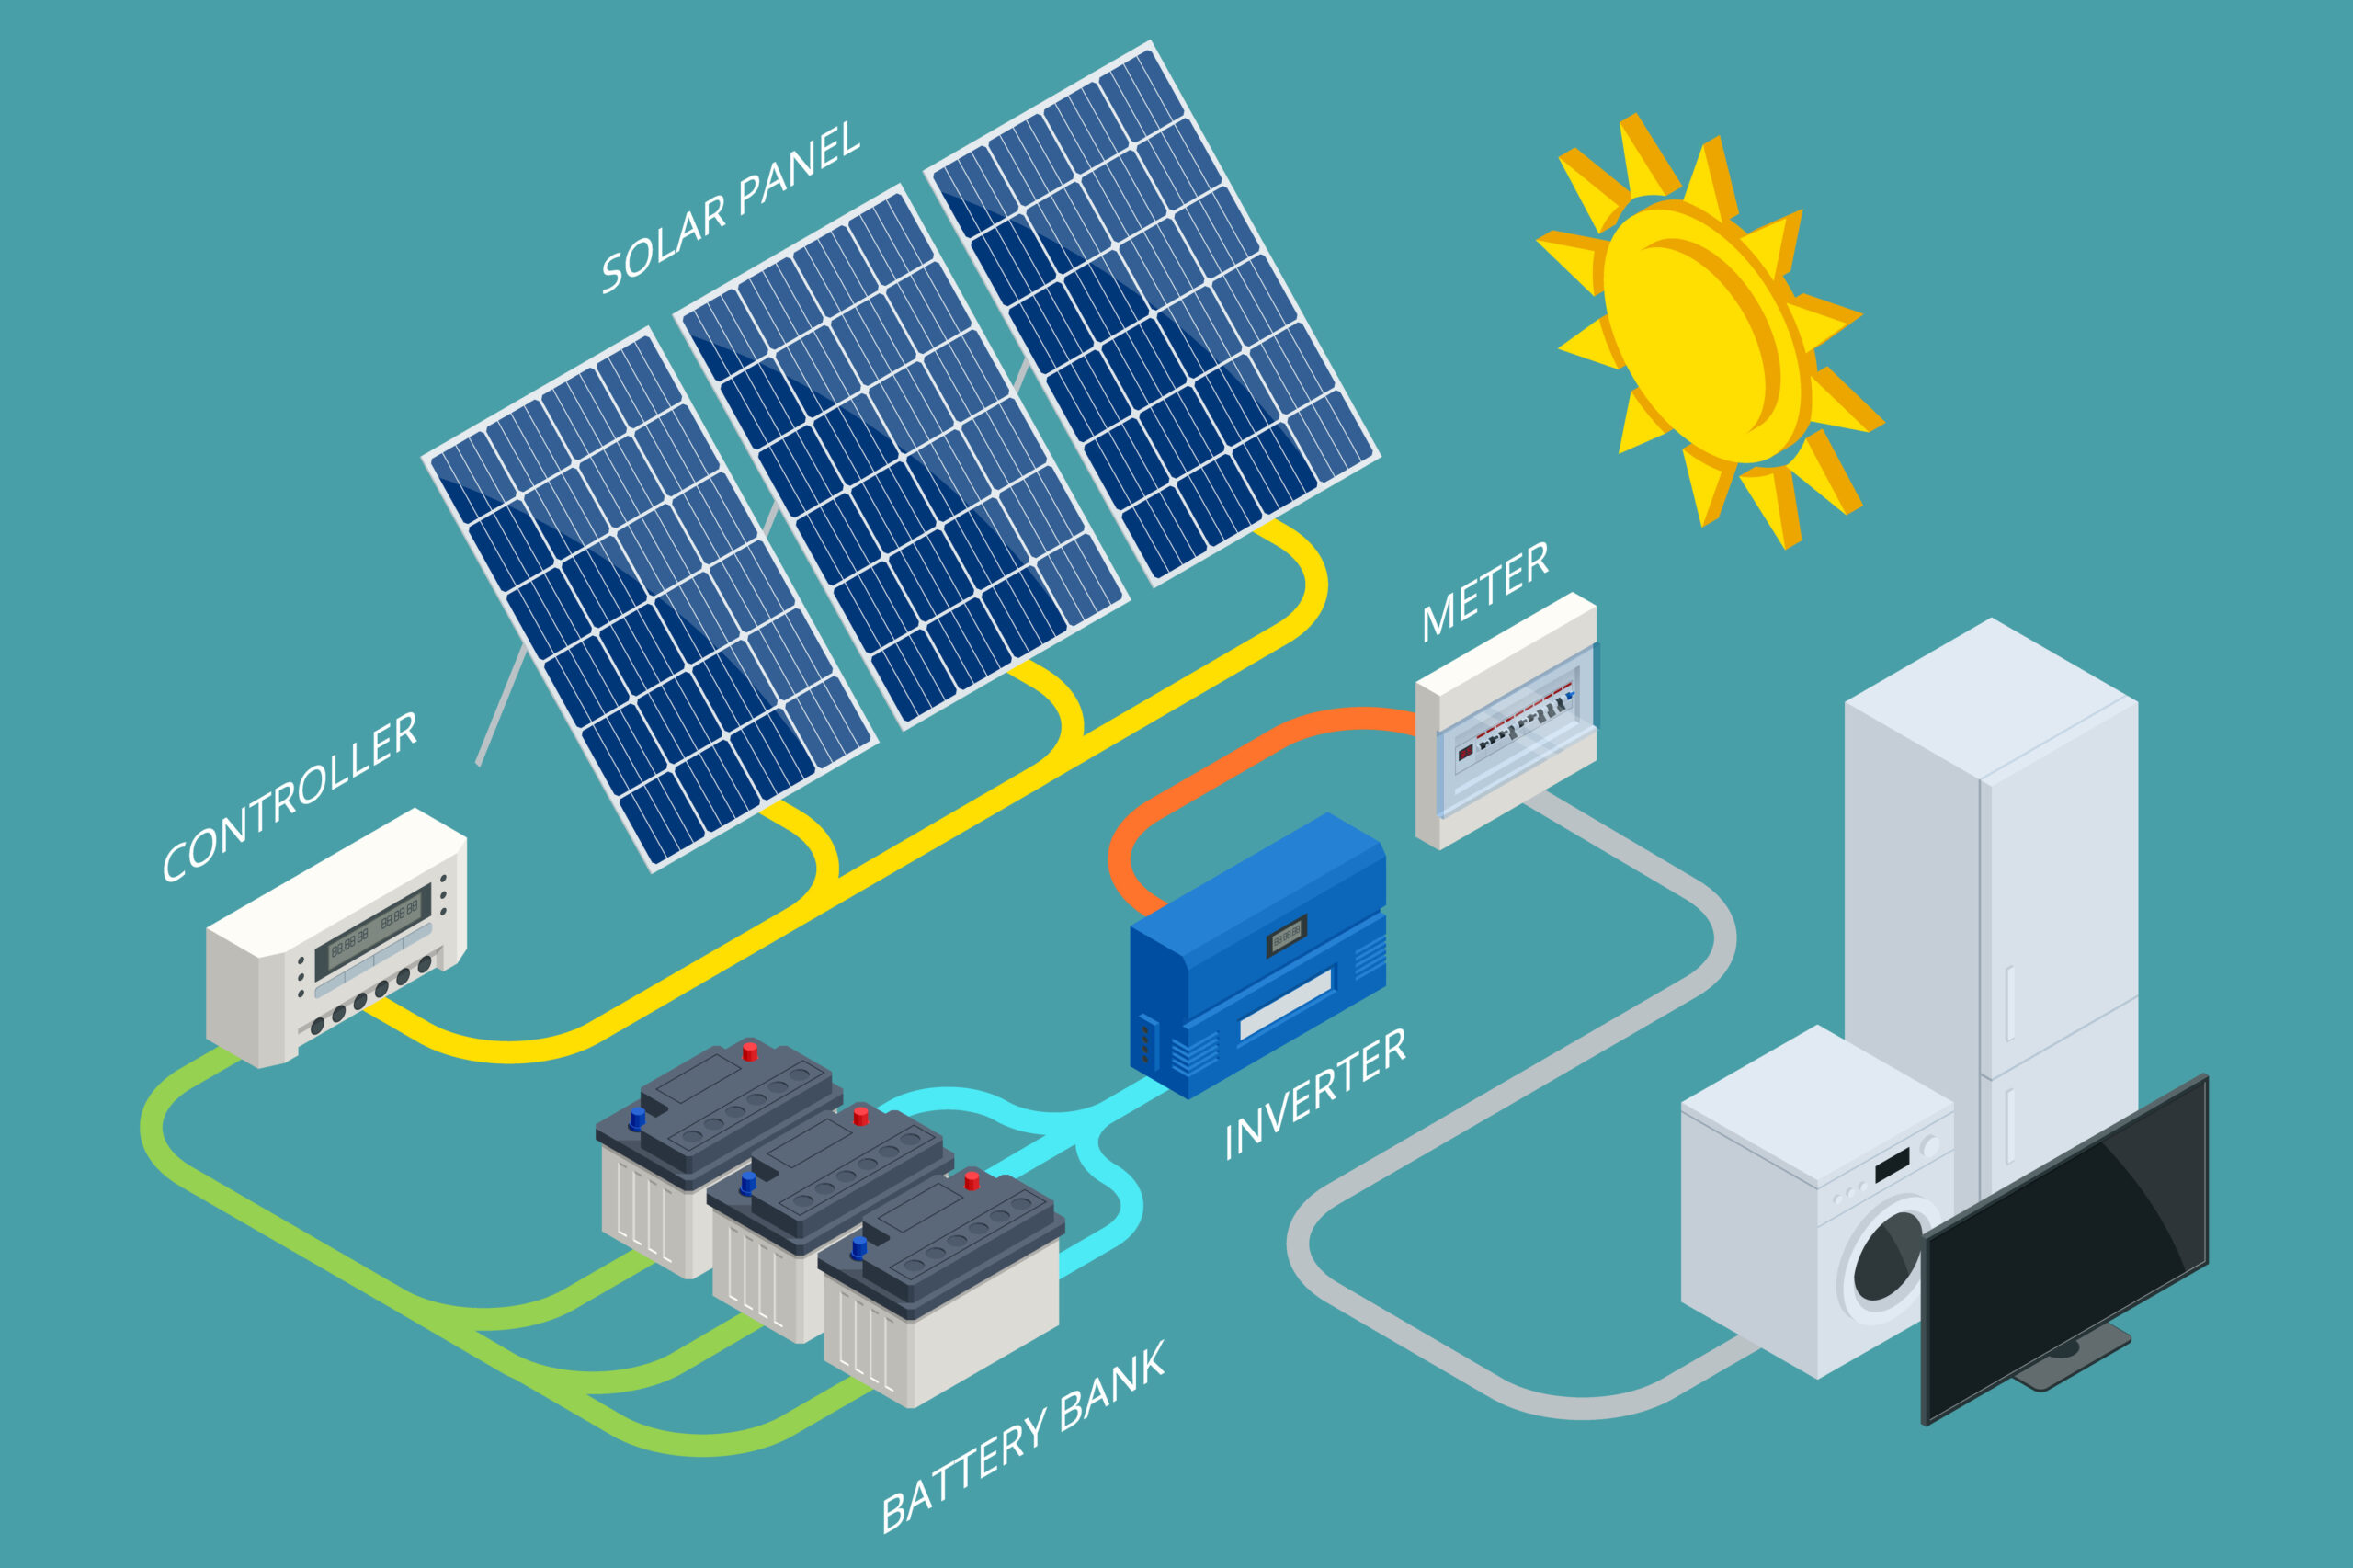 Solar Panel cell System with Hybrid Inverter, Controller, Battery Bank and Meter designed